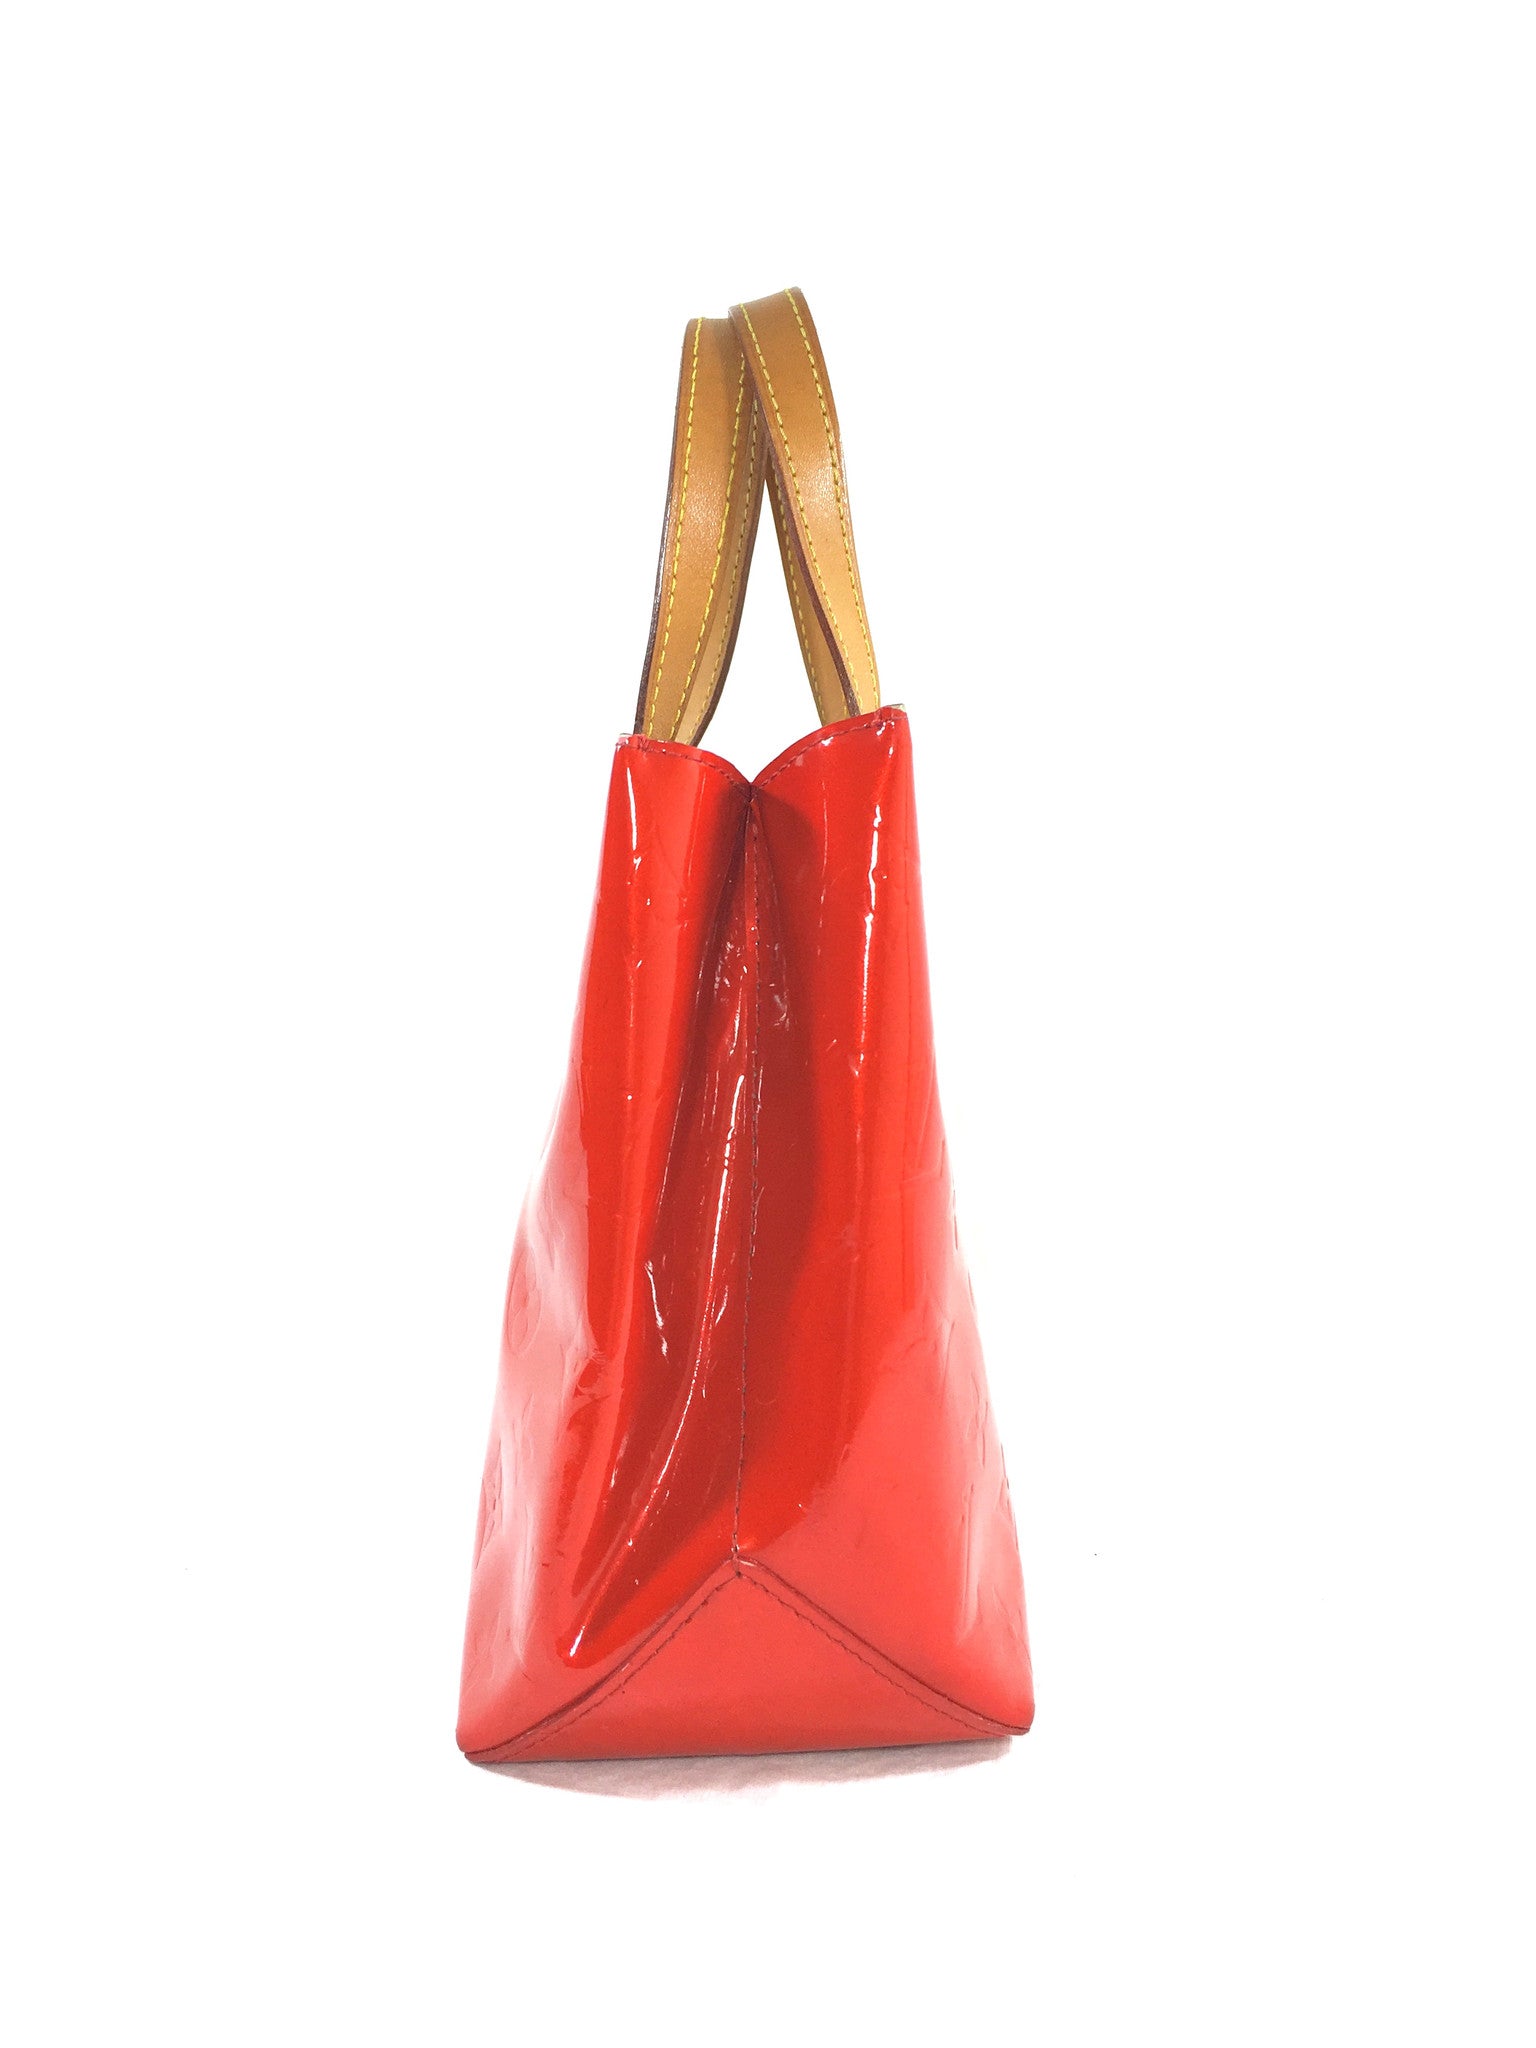 Louis Vuitton, Bags, Louis Vuitton Red Vernis Reade Pm Tote Bag With  Vernis Pm Agenda Planner